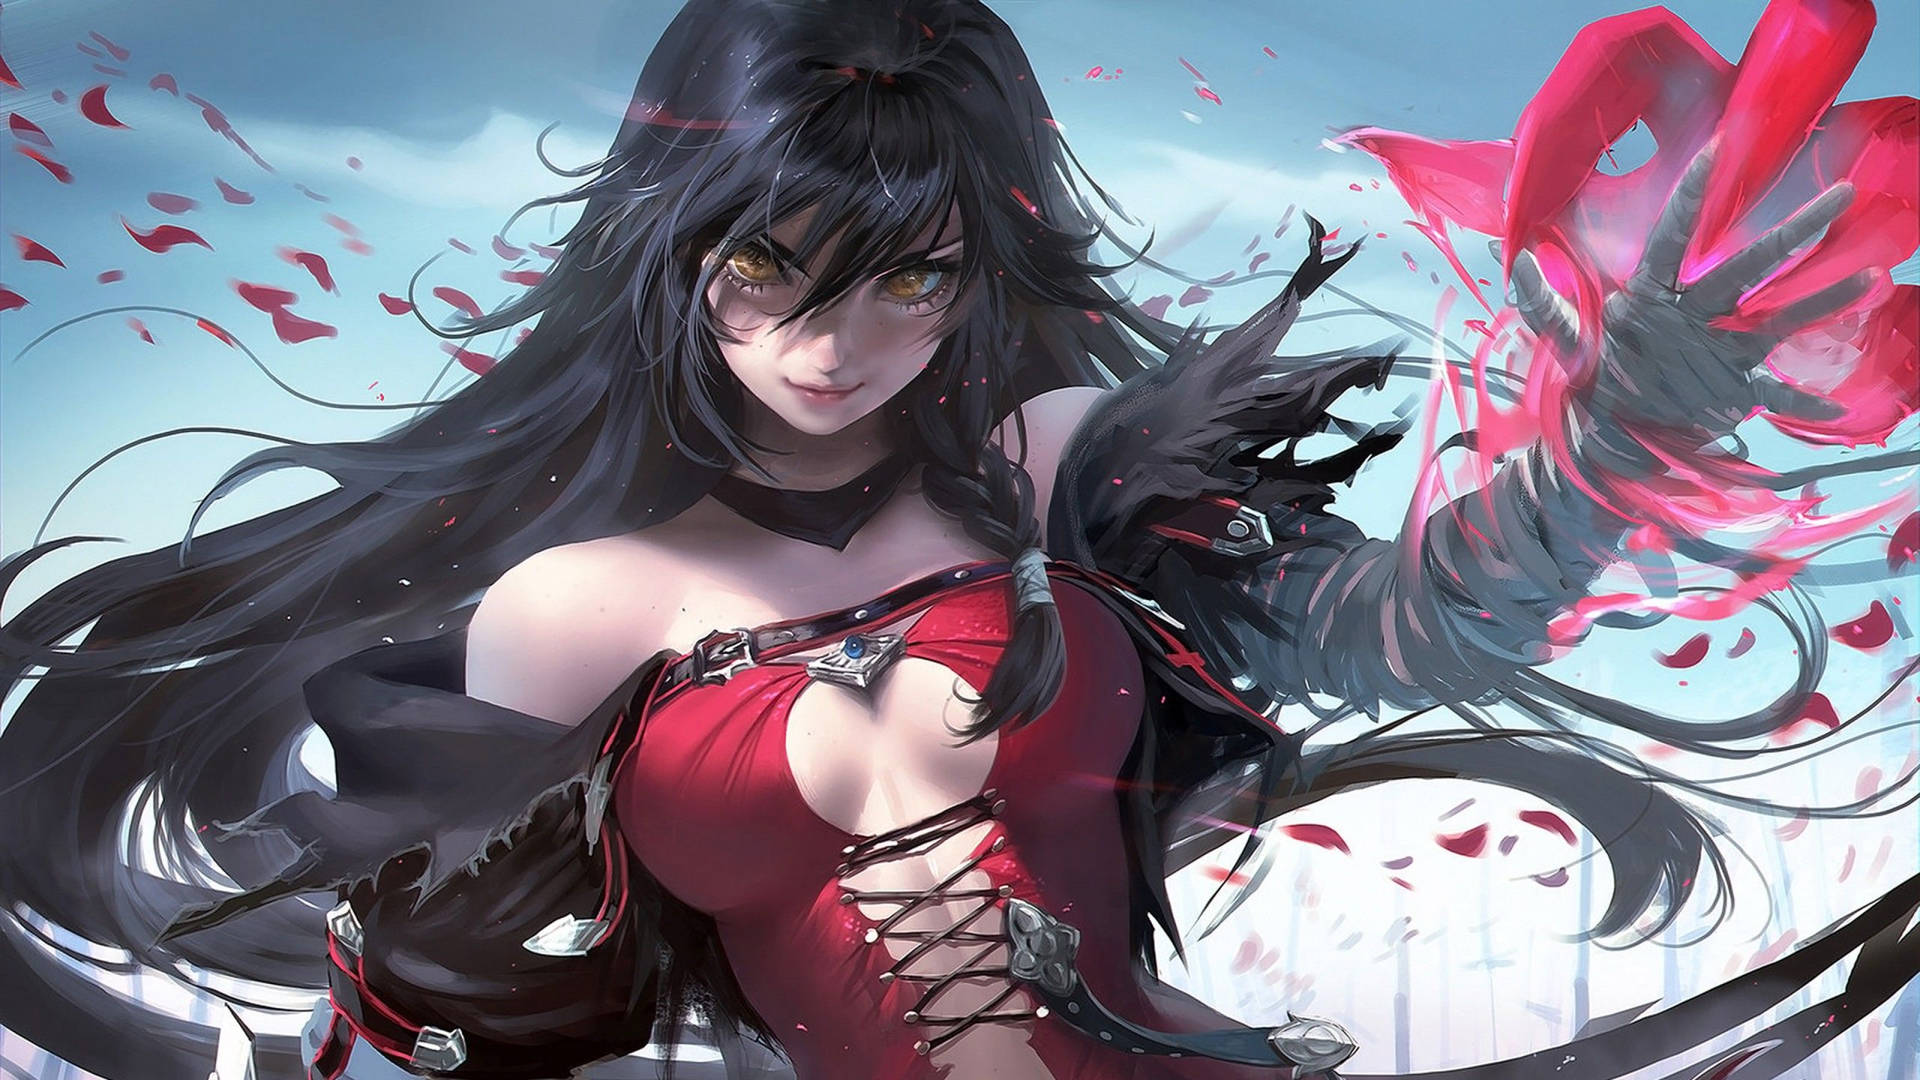 Hot Anime Girl with Claws Wallpaper